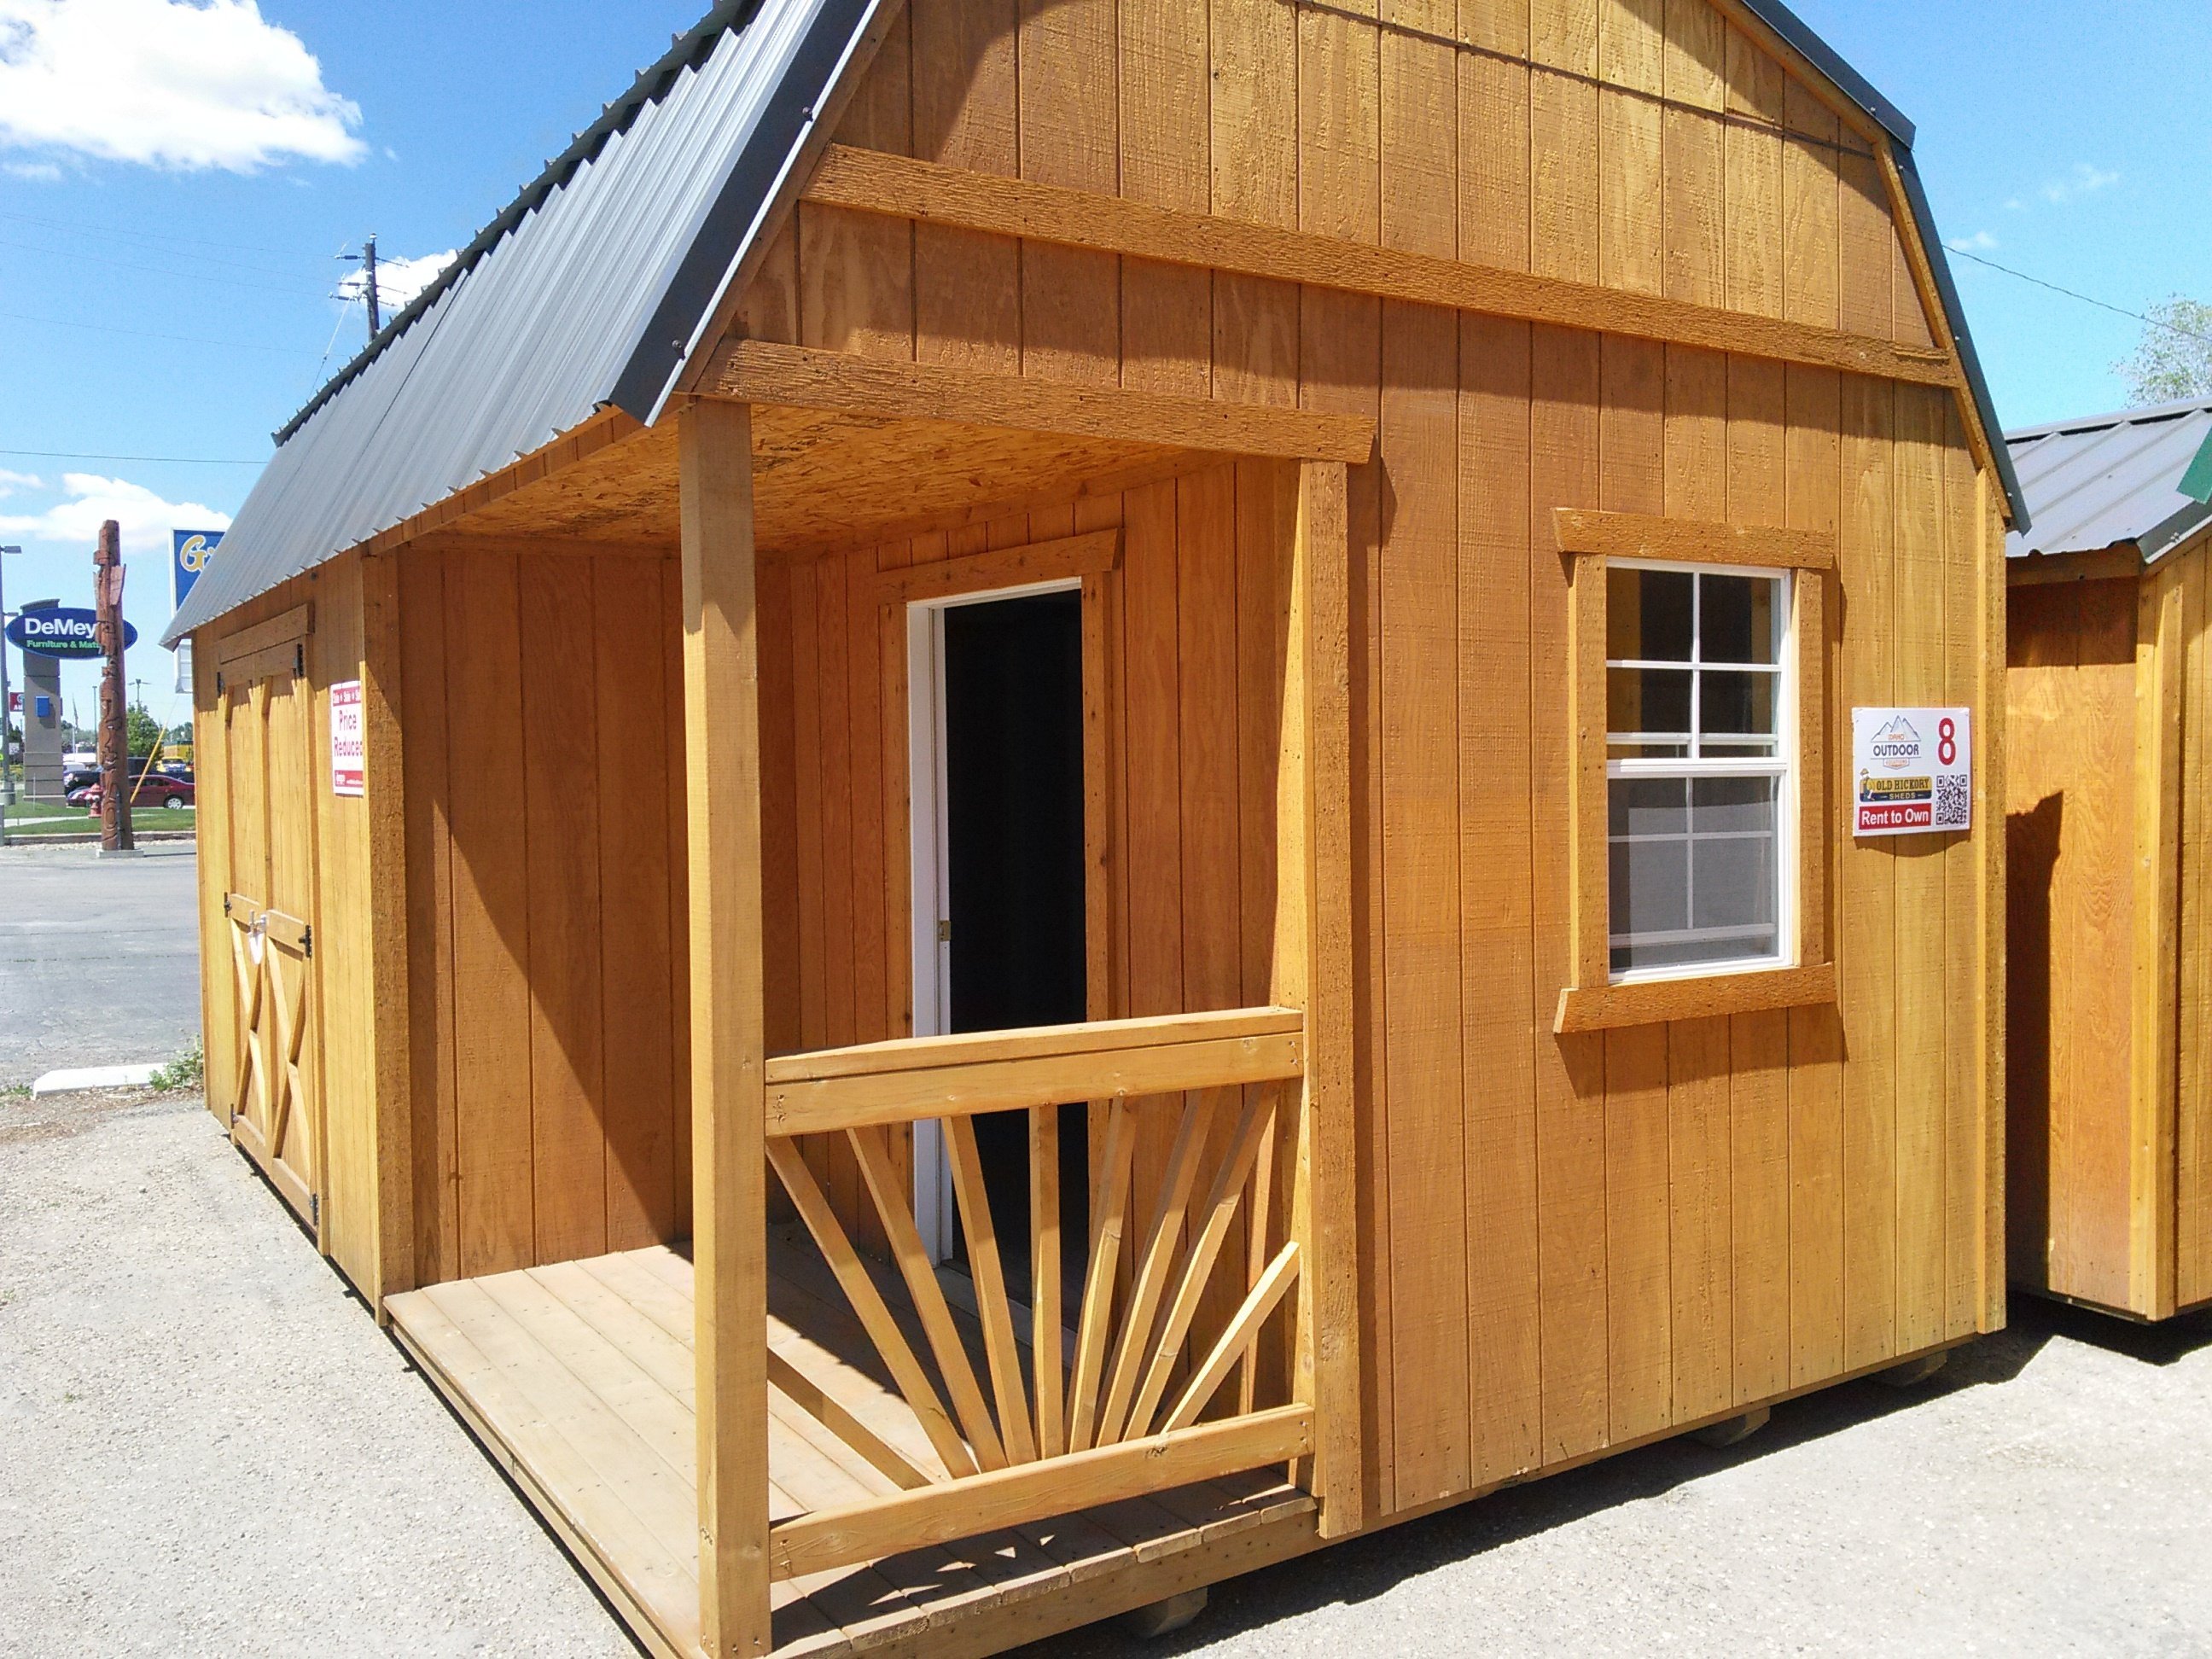 save 10% on a 12x20 a wood shed